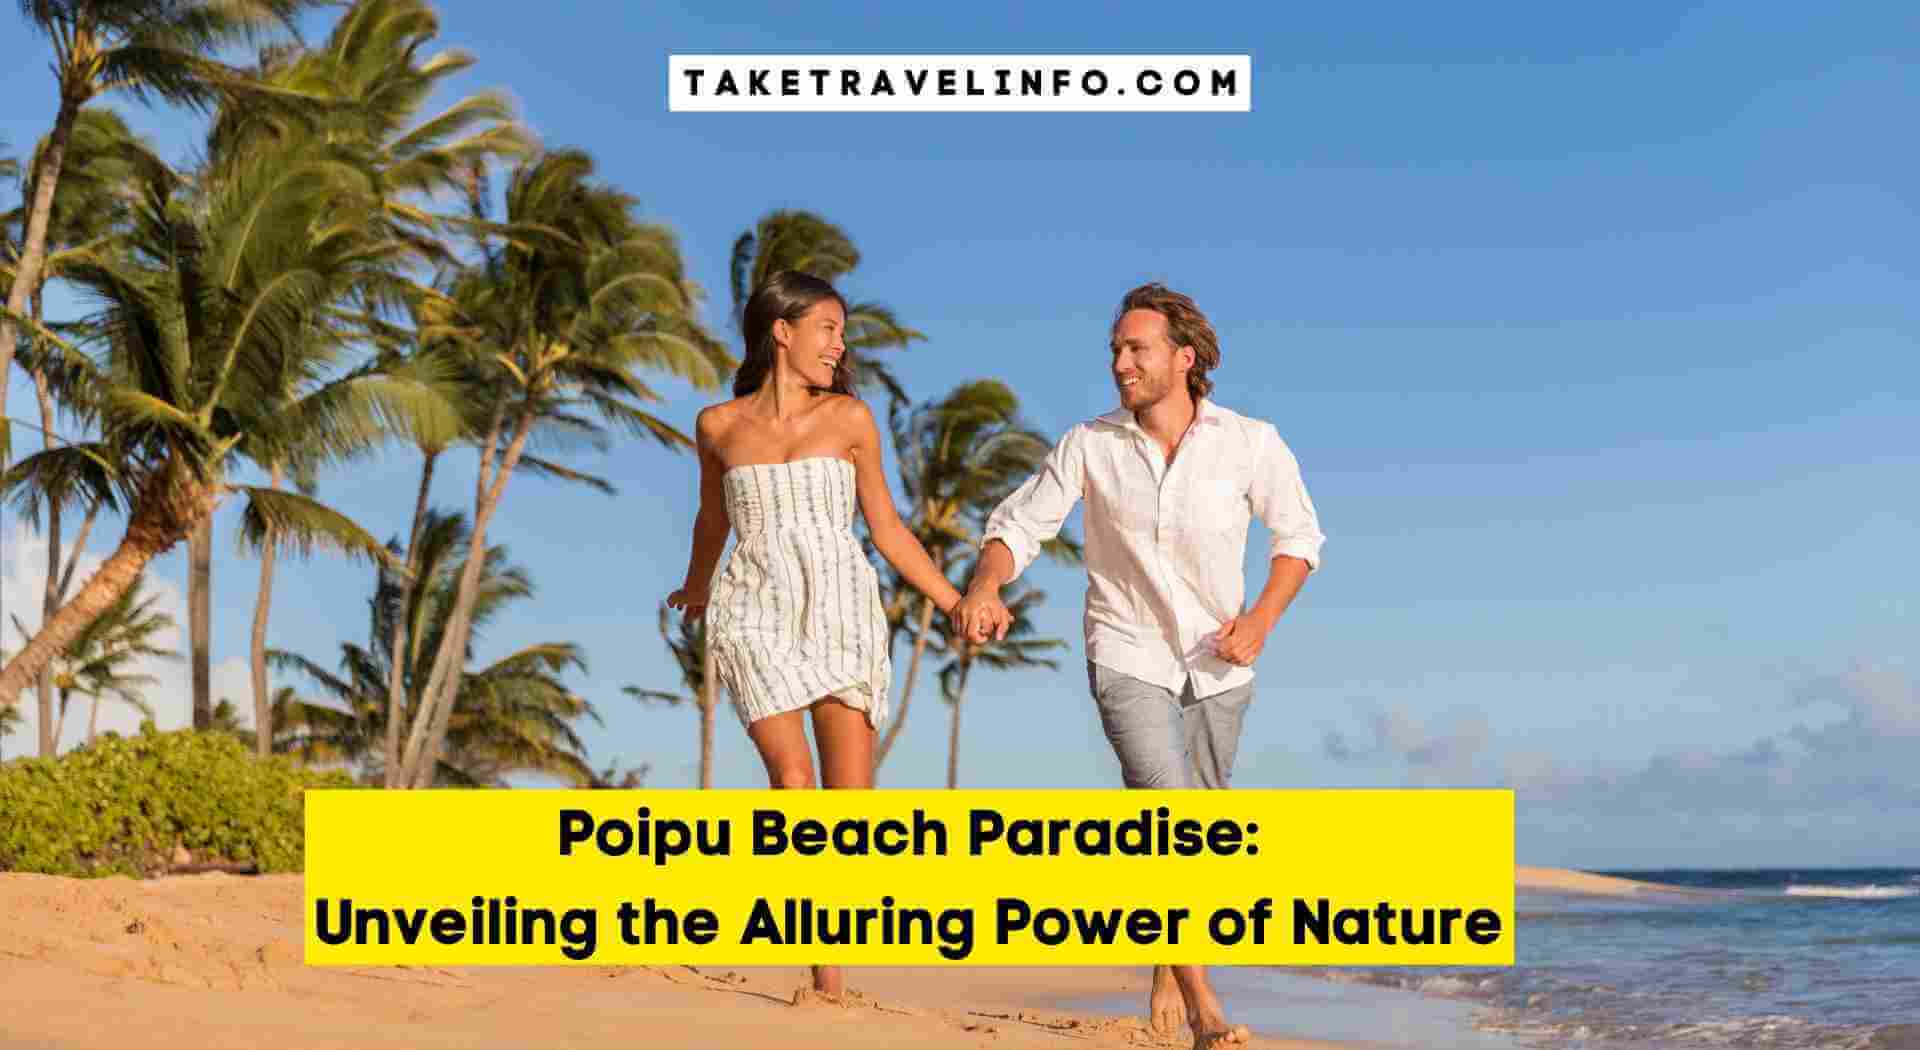 Poipu Beach Paradise: Unveiling the Alluring Power of Nature